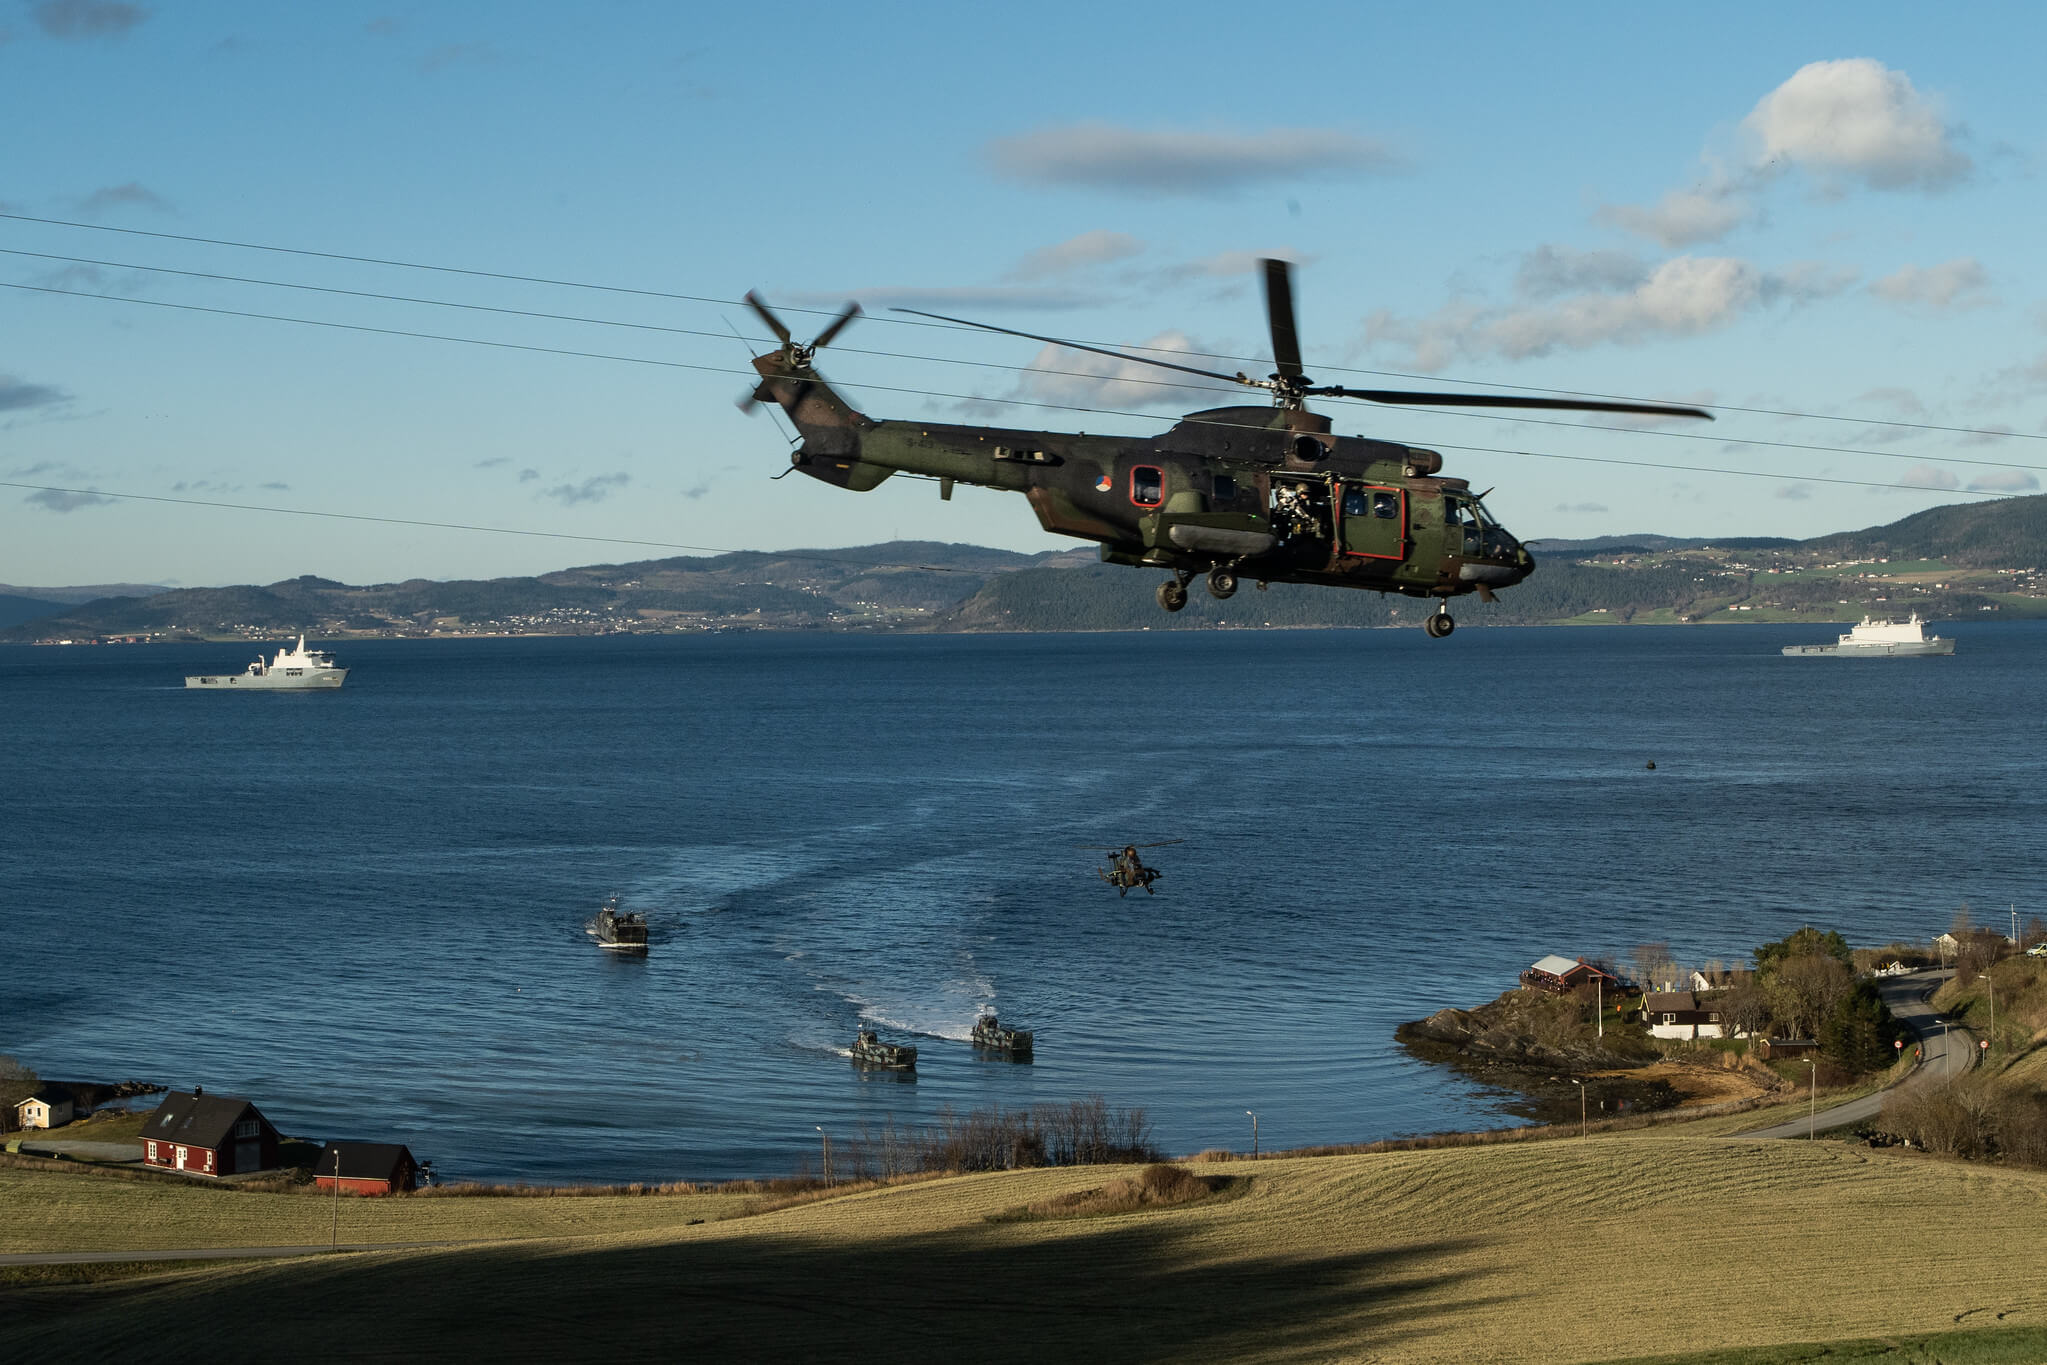 Boxhoorn - A Dutch Cougar helicopter takes off while NATO forces prepare to make an amphibious landing at a media event held during Exercise Trident Juncture 18 in 2018. NATO